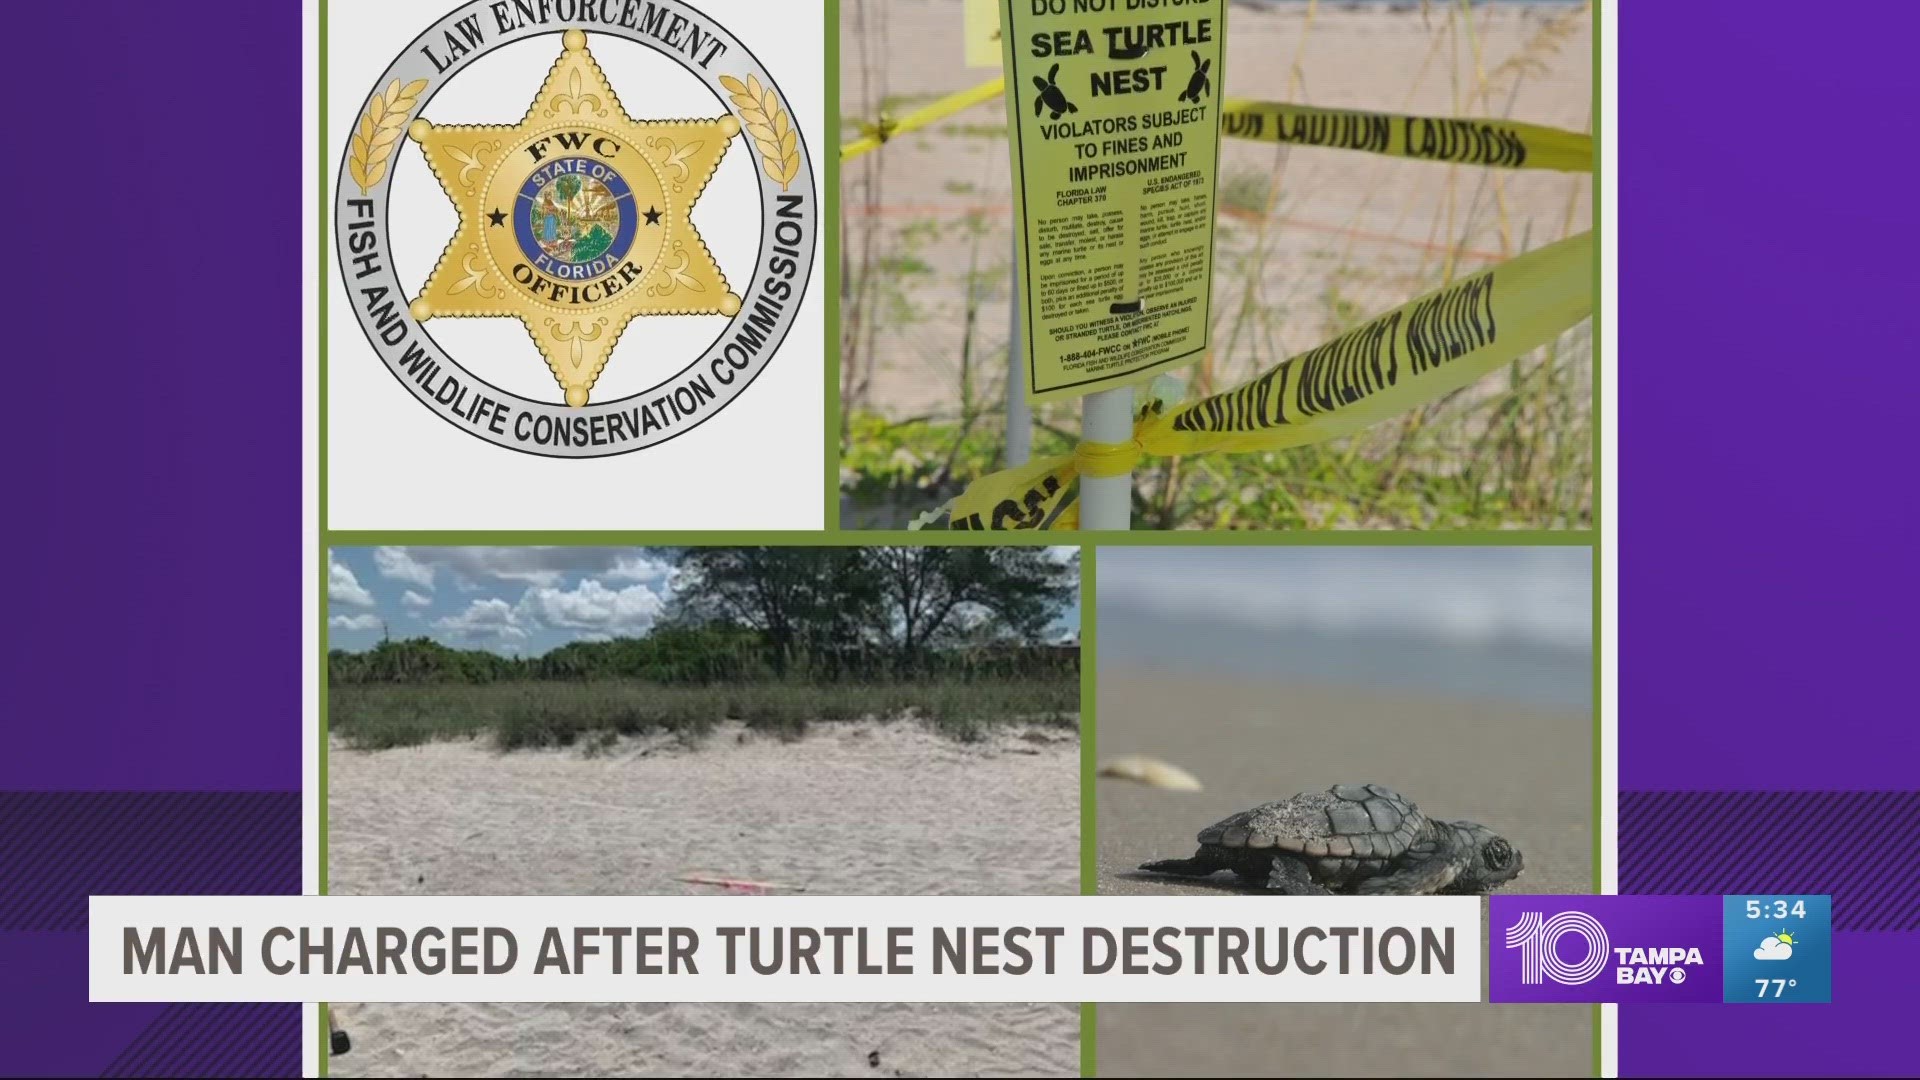 Authorities said the man was caught on video digging inside a marked sea turtle nest.